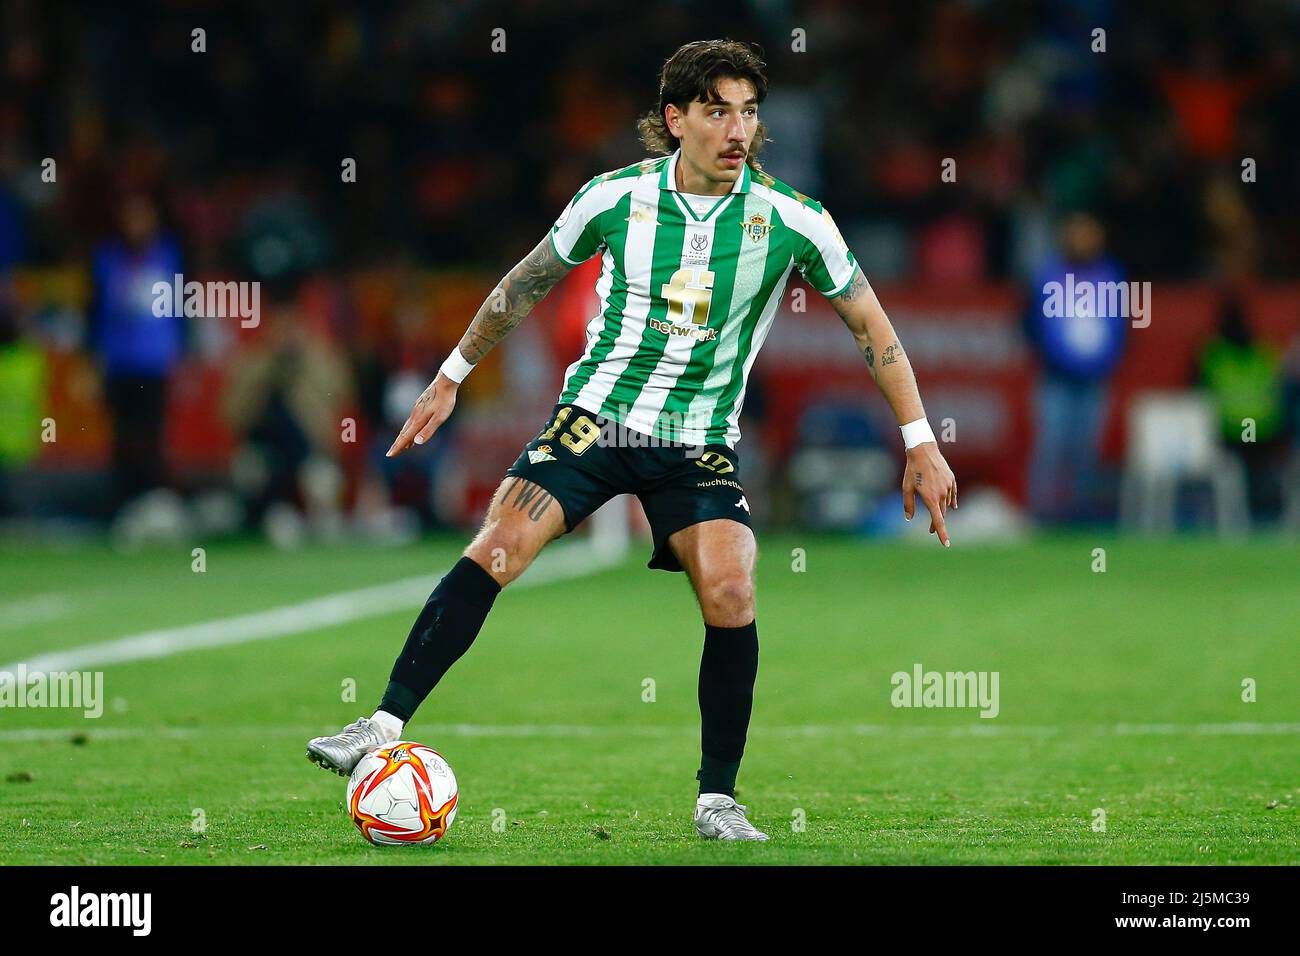 Hector Bellerin of Real Betis during the Copa del Rey match between Real  Betis and Valencia CF played at La Cartuja Stadium on April 23, 2022 in  Sevilla, Spain. (Photo by Antonio